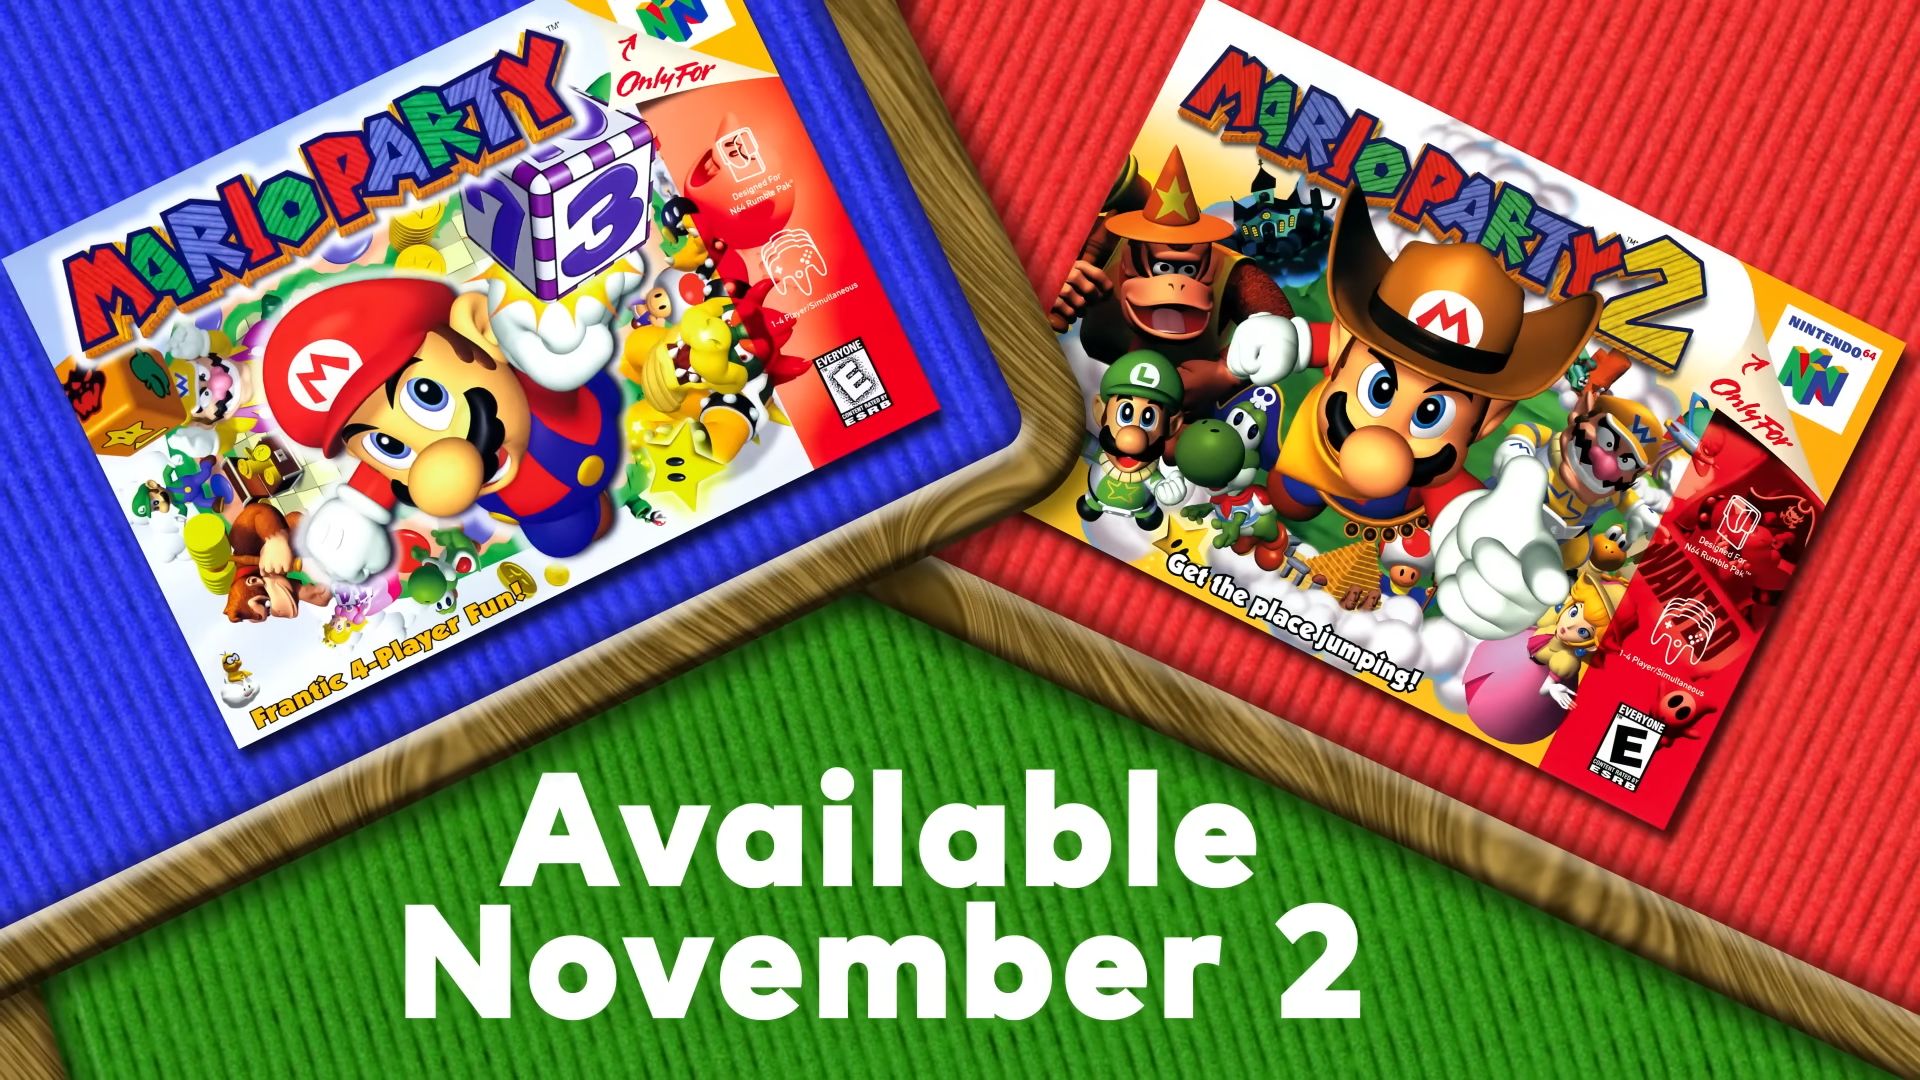 Mario Party 1 and 2 Coming to Nintendo Switch Online + Expansion Pack on November 2nd